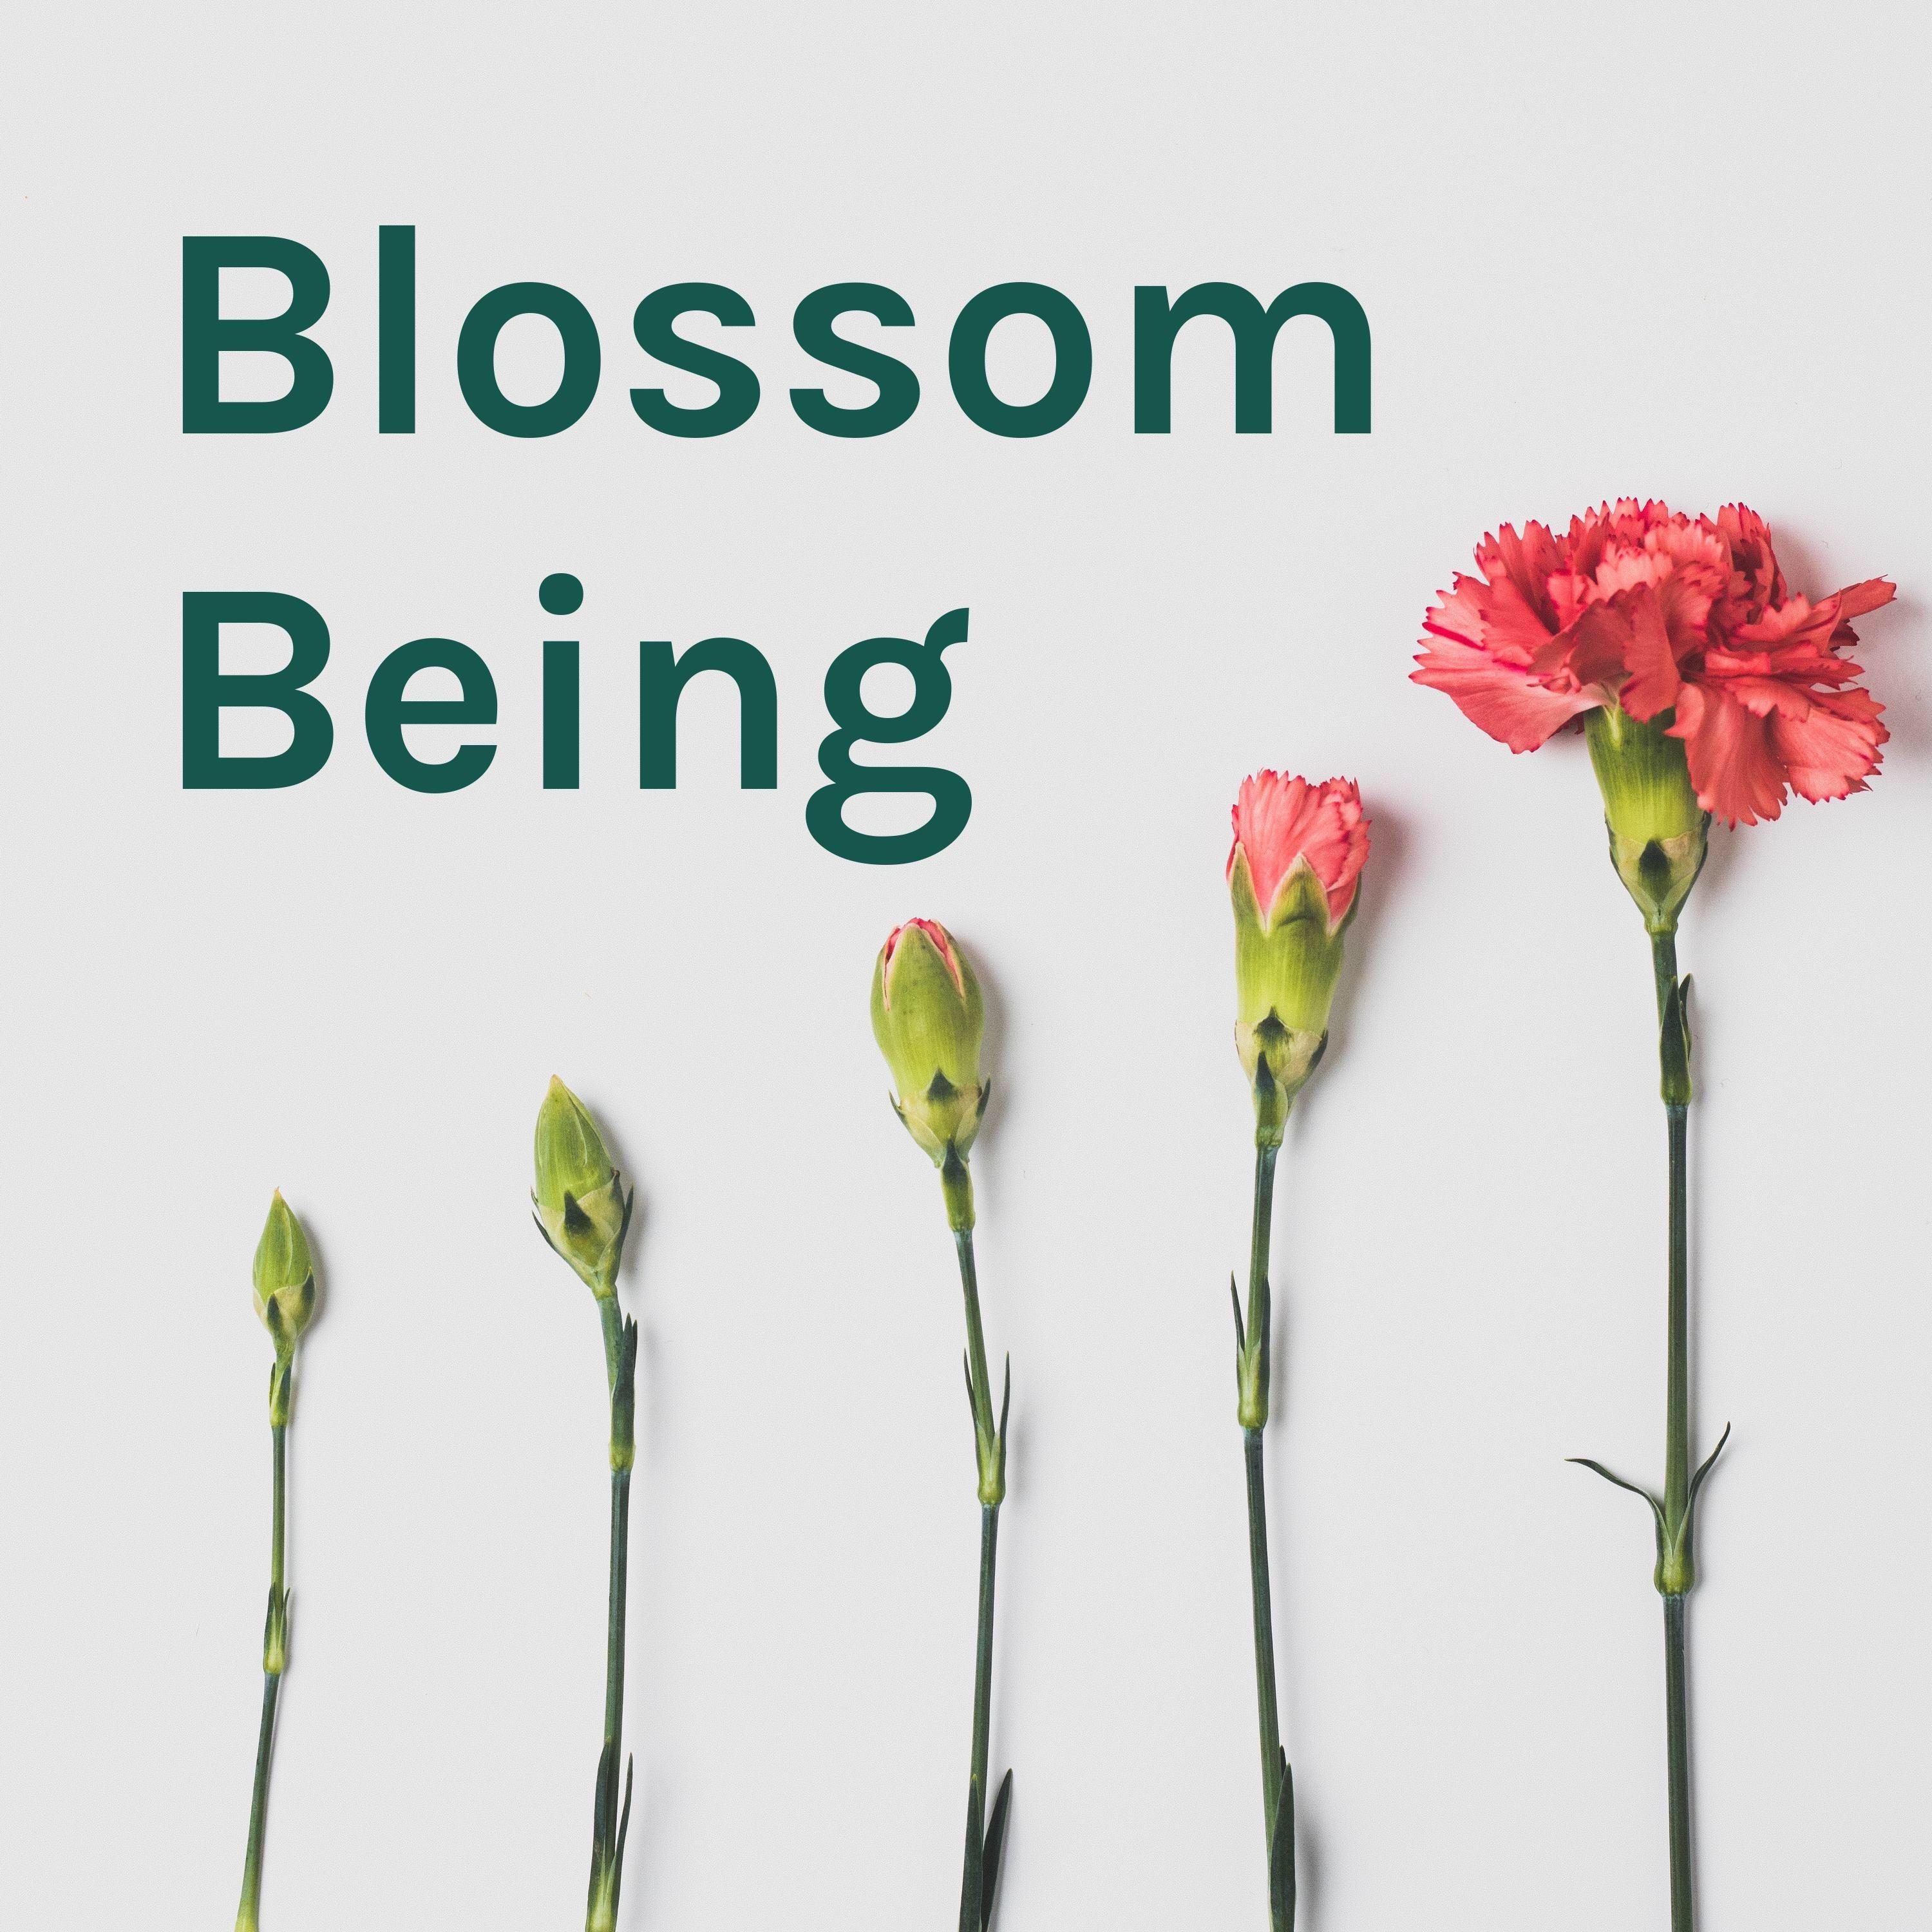 Blossom Being